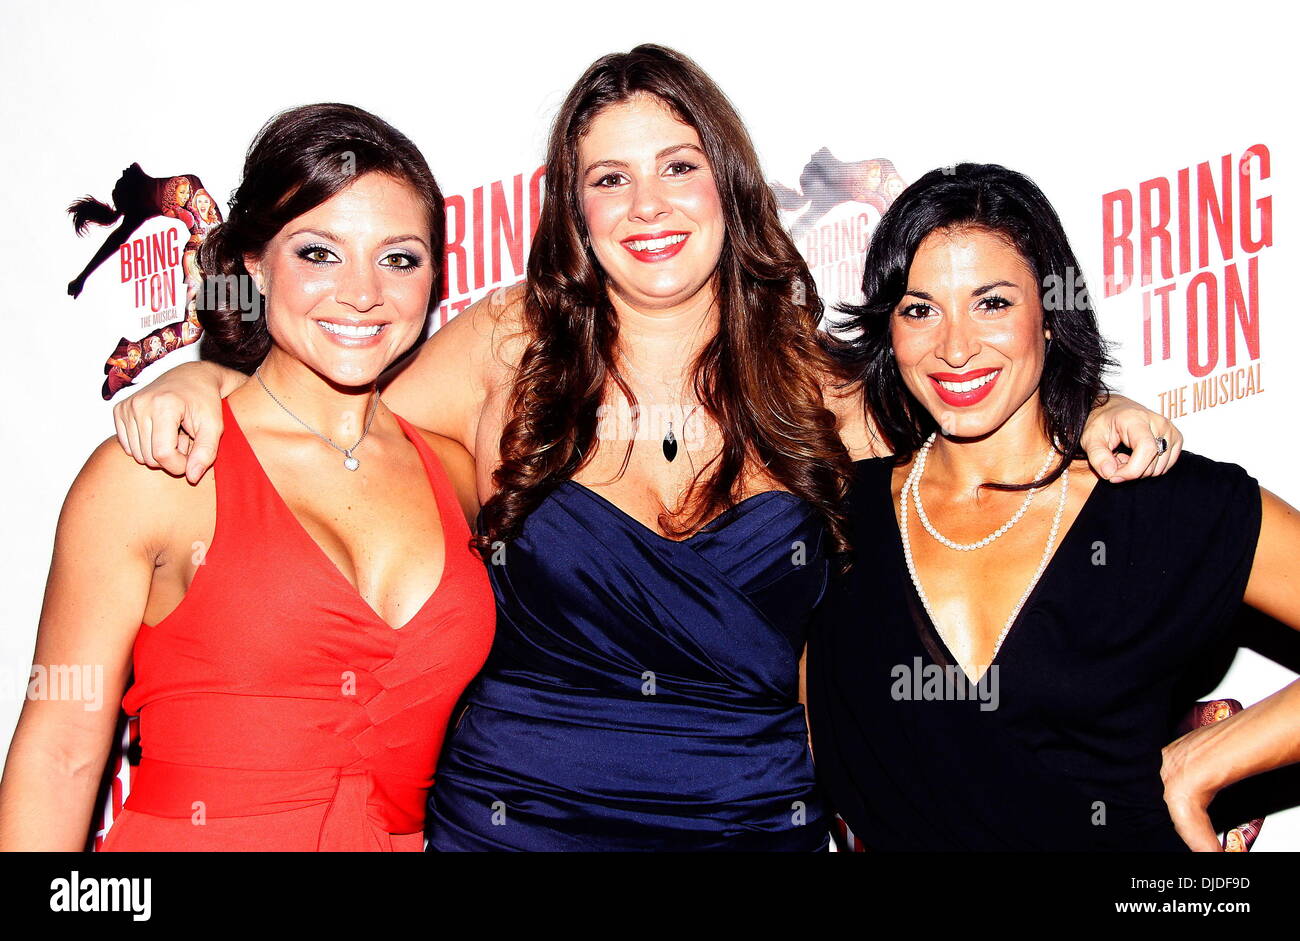 Jessica Colombo, Holly-Ann Ruggiero and Stephanie Klemons Broadway opening  night of 'Bring It On: The Musical' at the Saint James Theatre - Arrivals  New York City, USA - 01.08.12 Stock Photo - Alamy